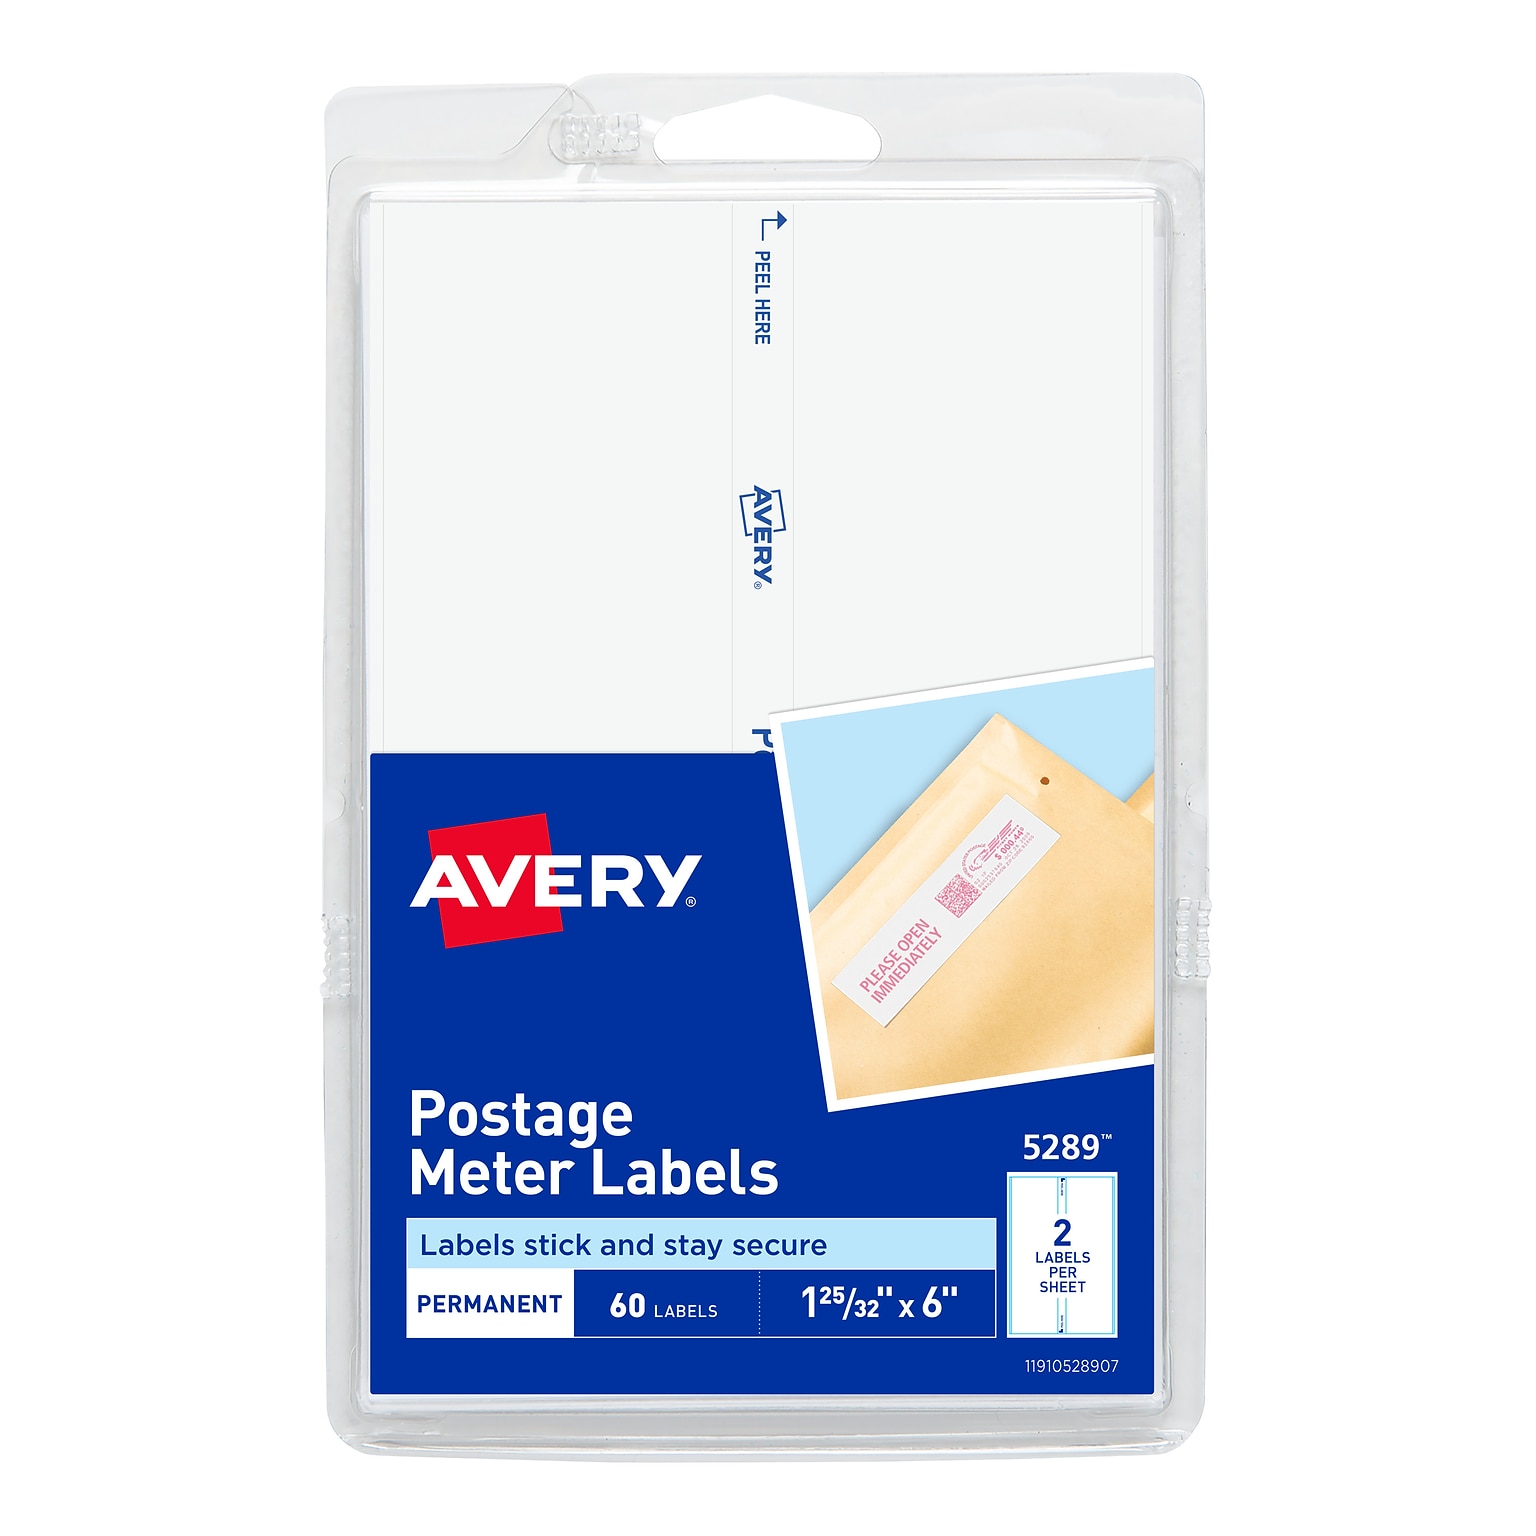 Avery Postage Meter Labels for Personal Post Office, 1 25/32 x 6, White, 2 Labels/Sheet, 30 Sheets/Pack, 60 Labels/Pack (5289)